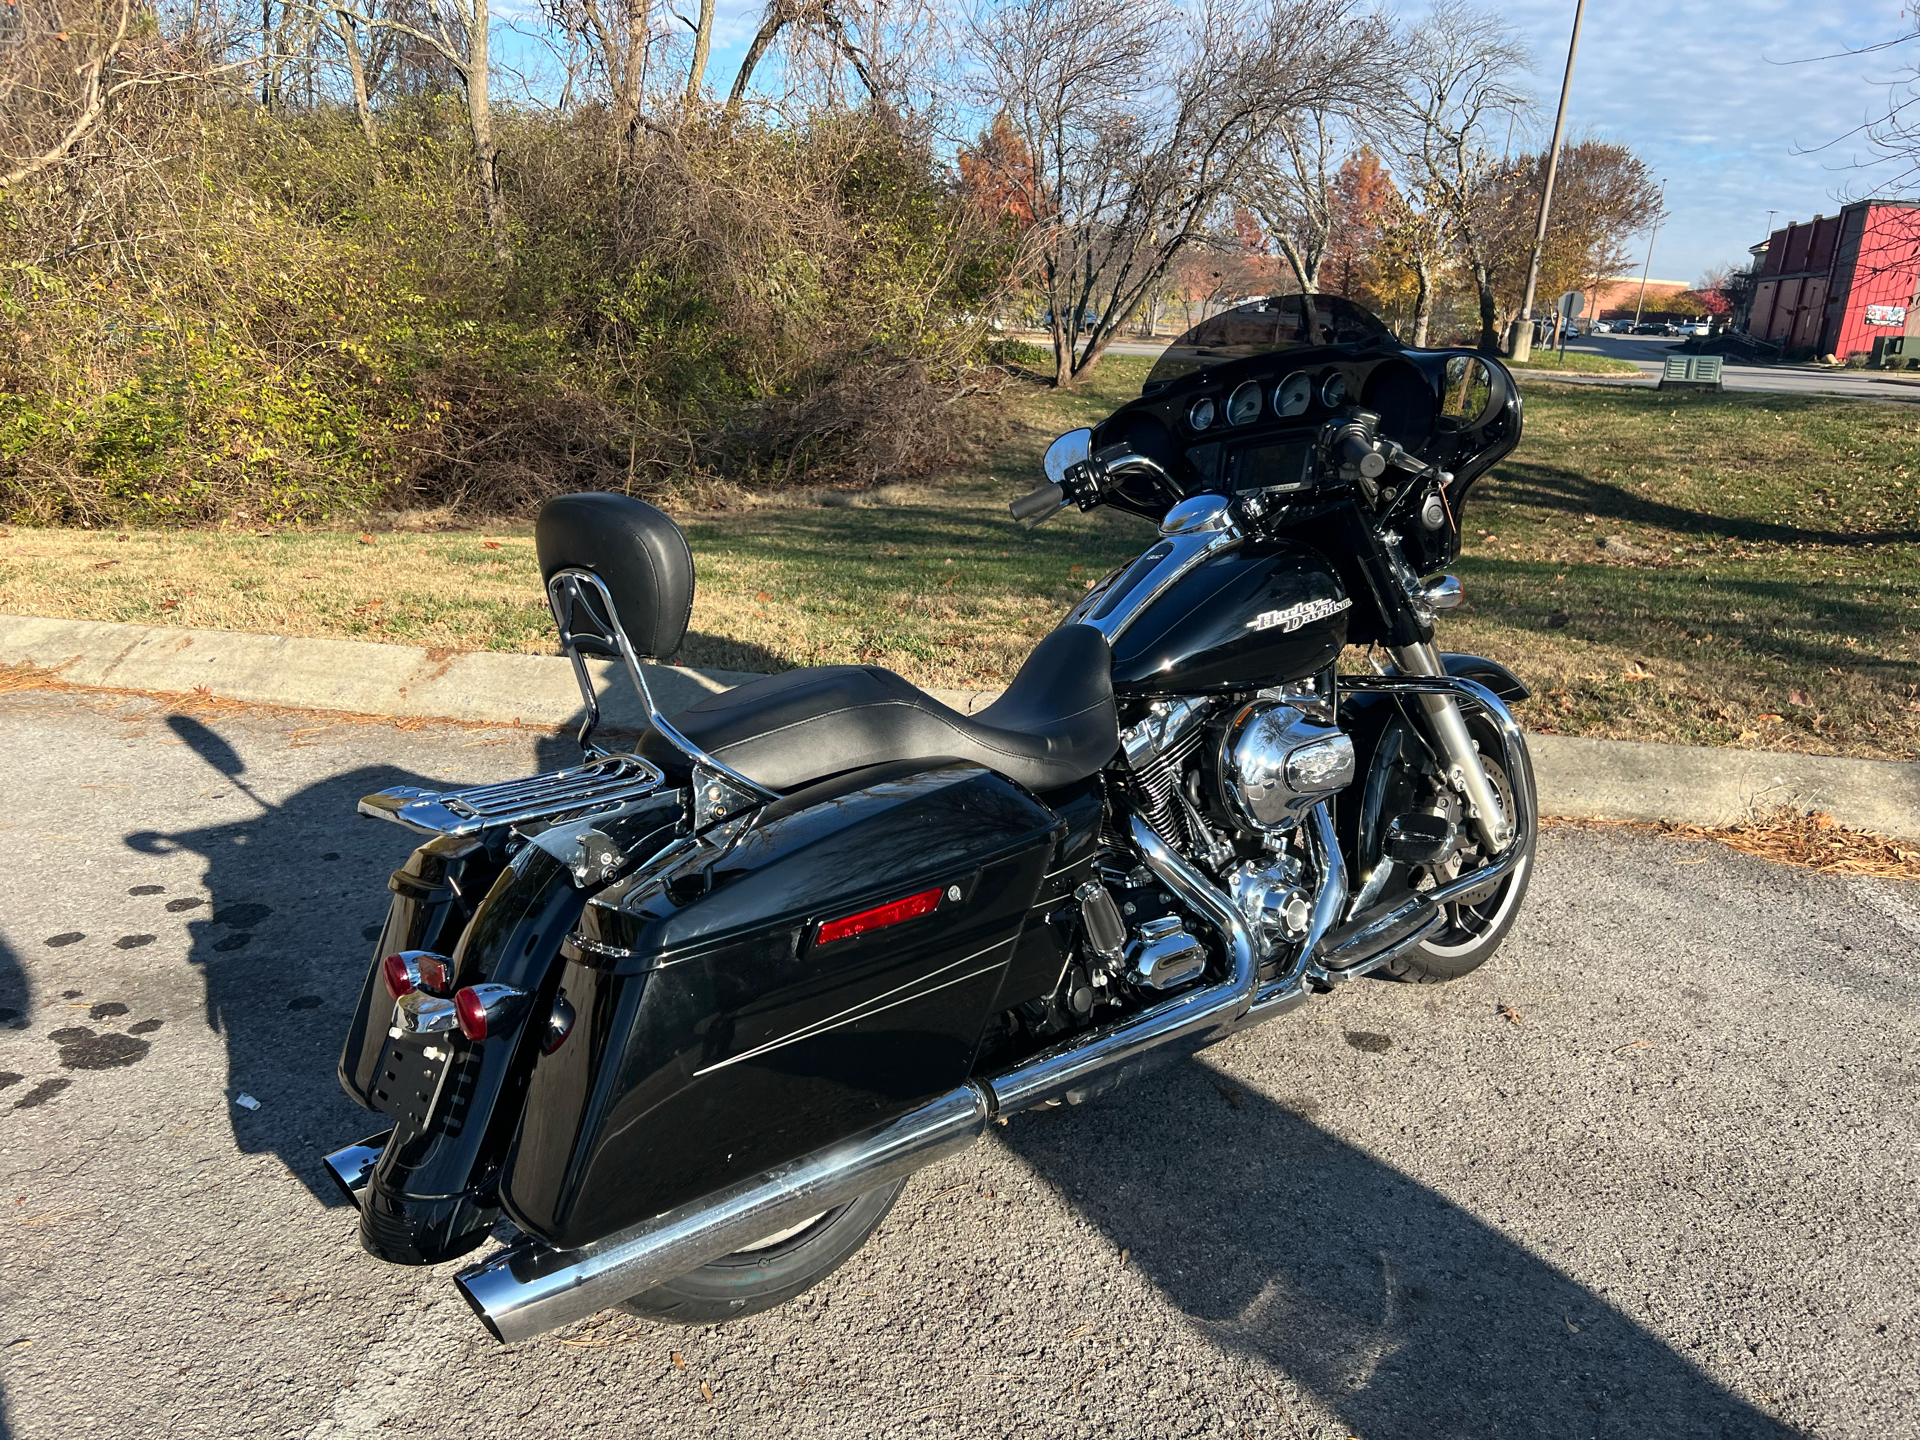 2016 Harley-Davidson Street Glide® Special in Franklin, Tennessee - Photo 10